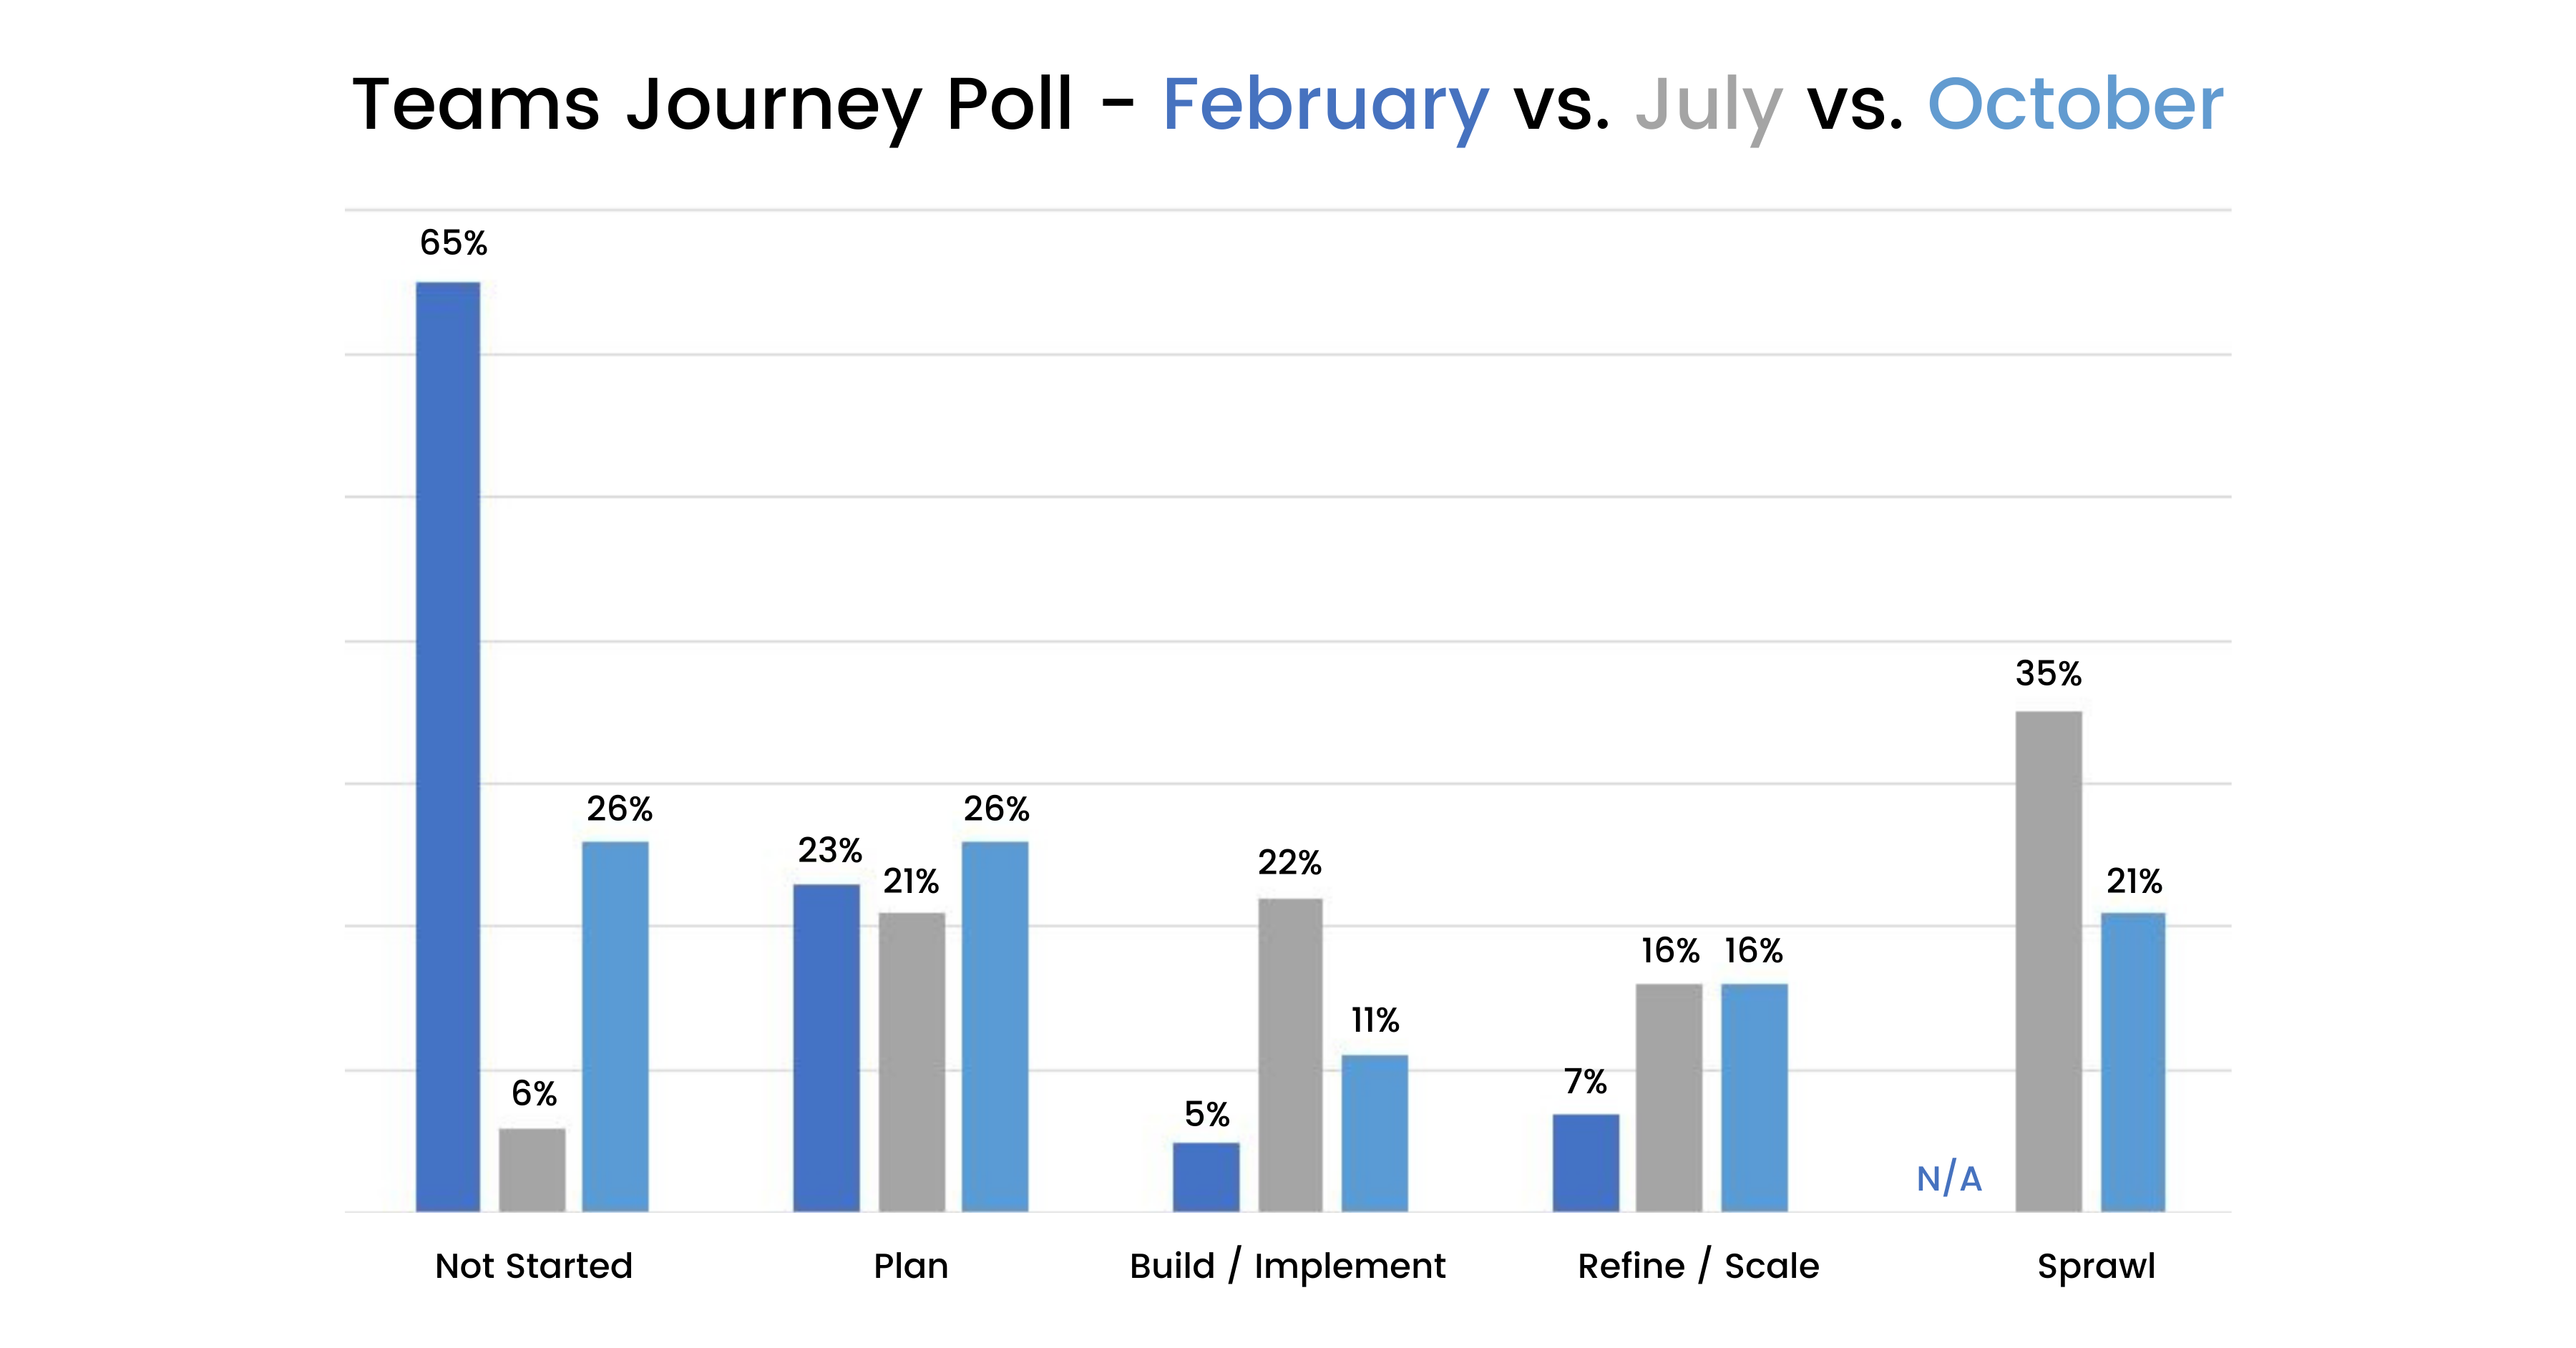 Access Sciences Blog REINFORCING CHANGE FOR MICROSOFT TEAMS Journey Poll